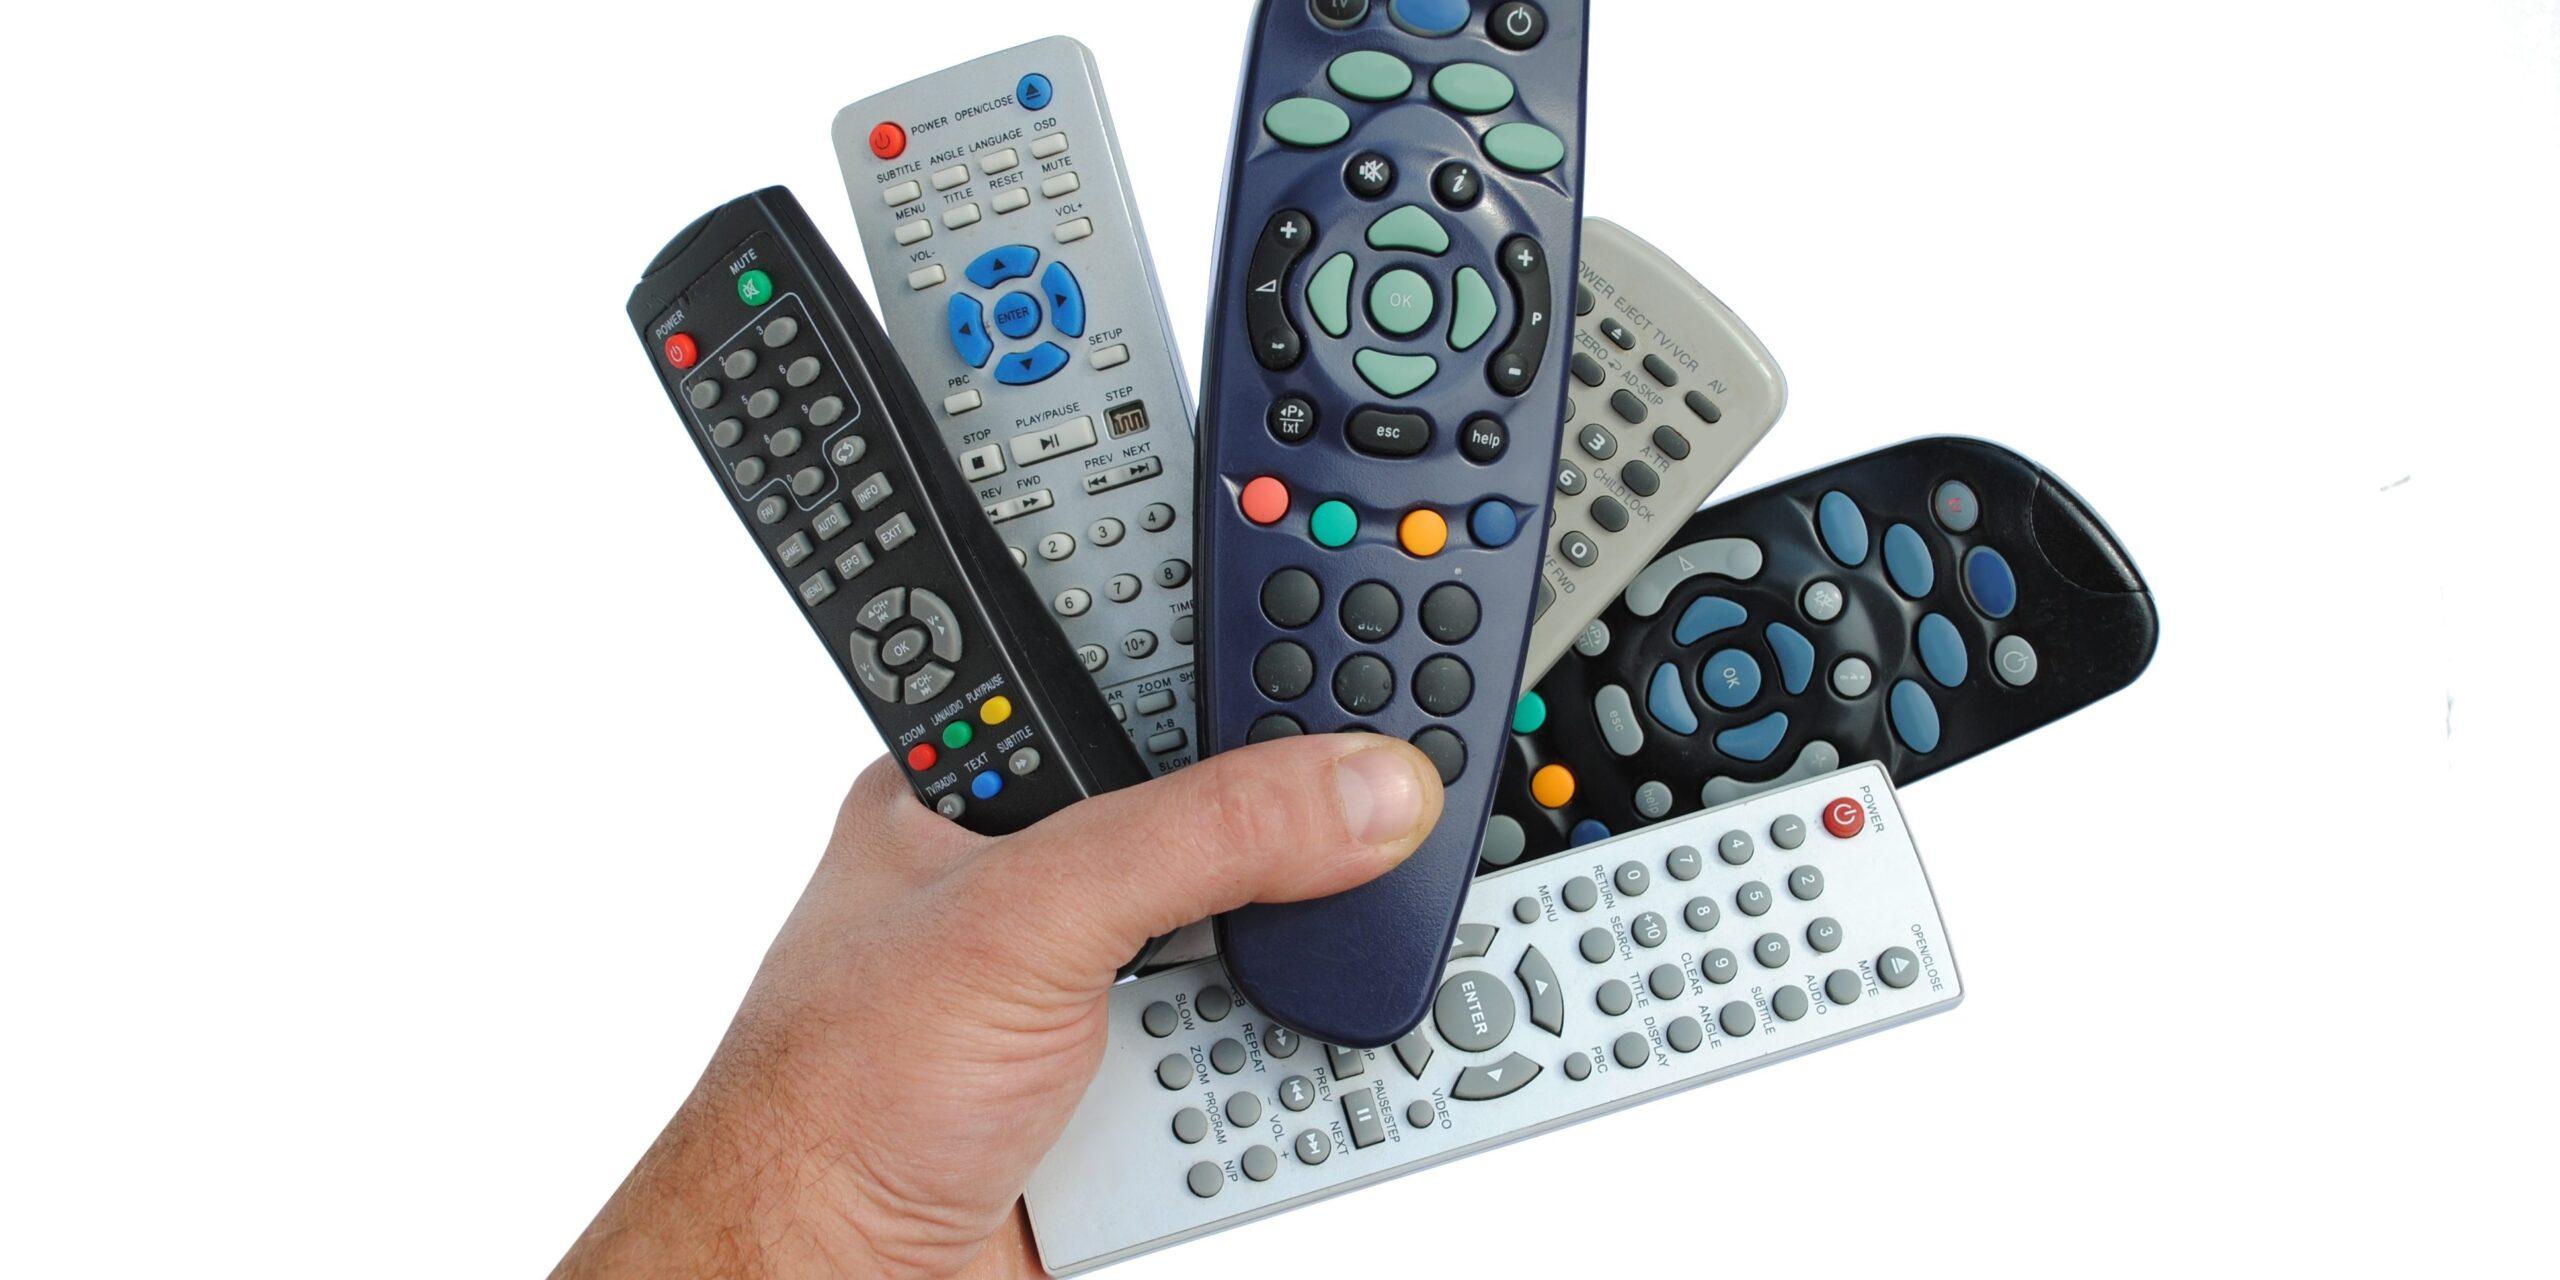 Why Is A Changhong Ruba TV Remote Beneficial For Smart TV?